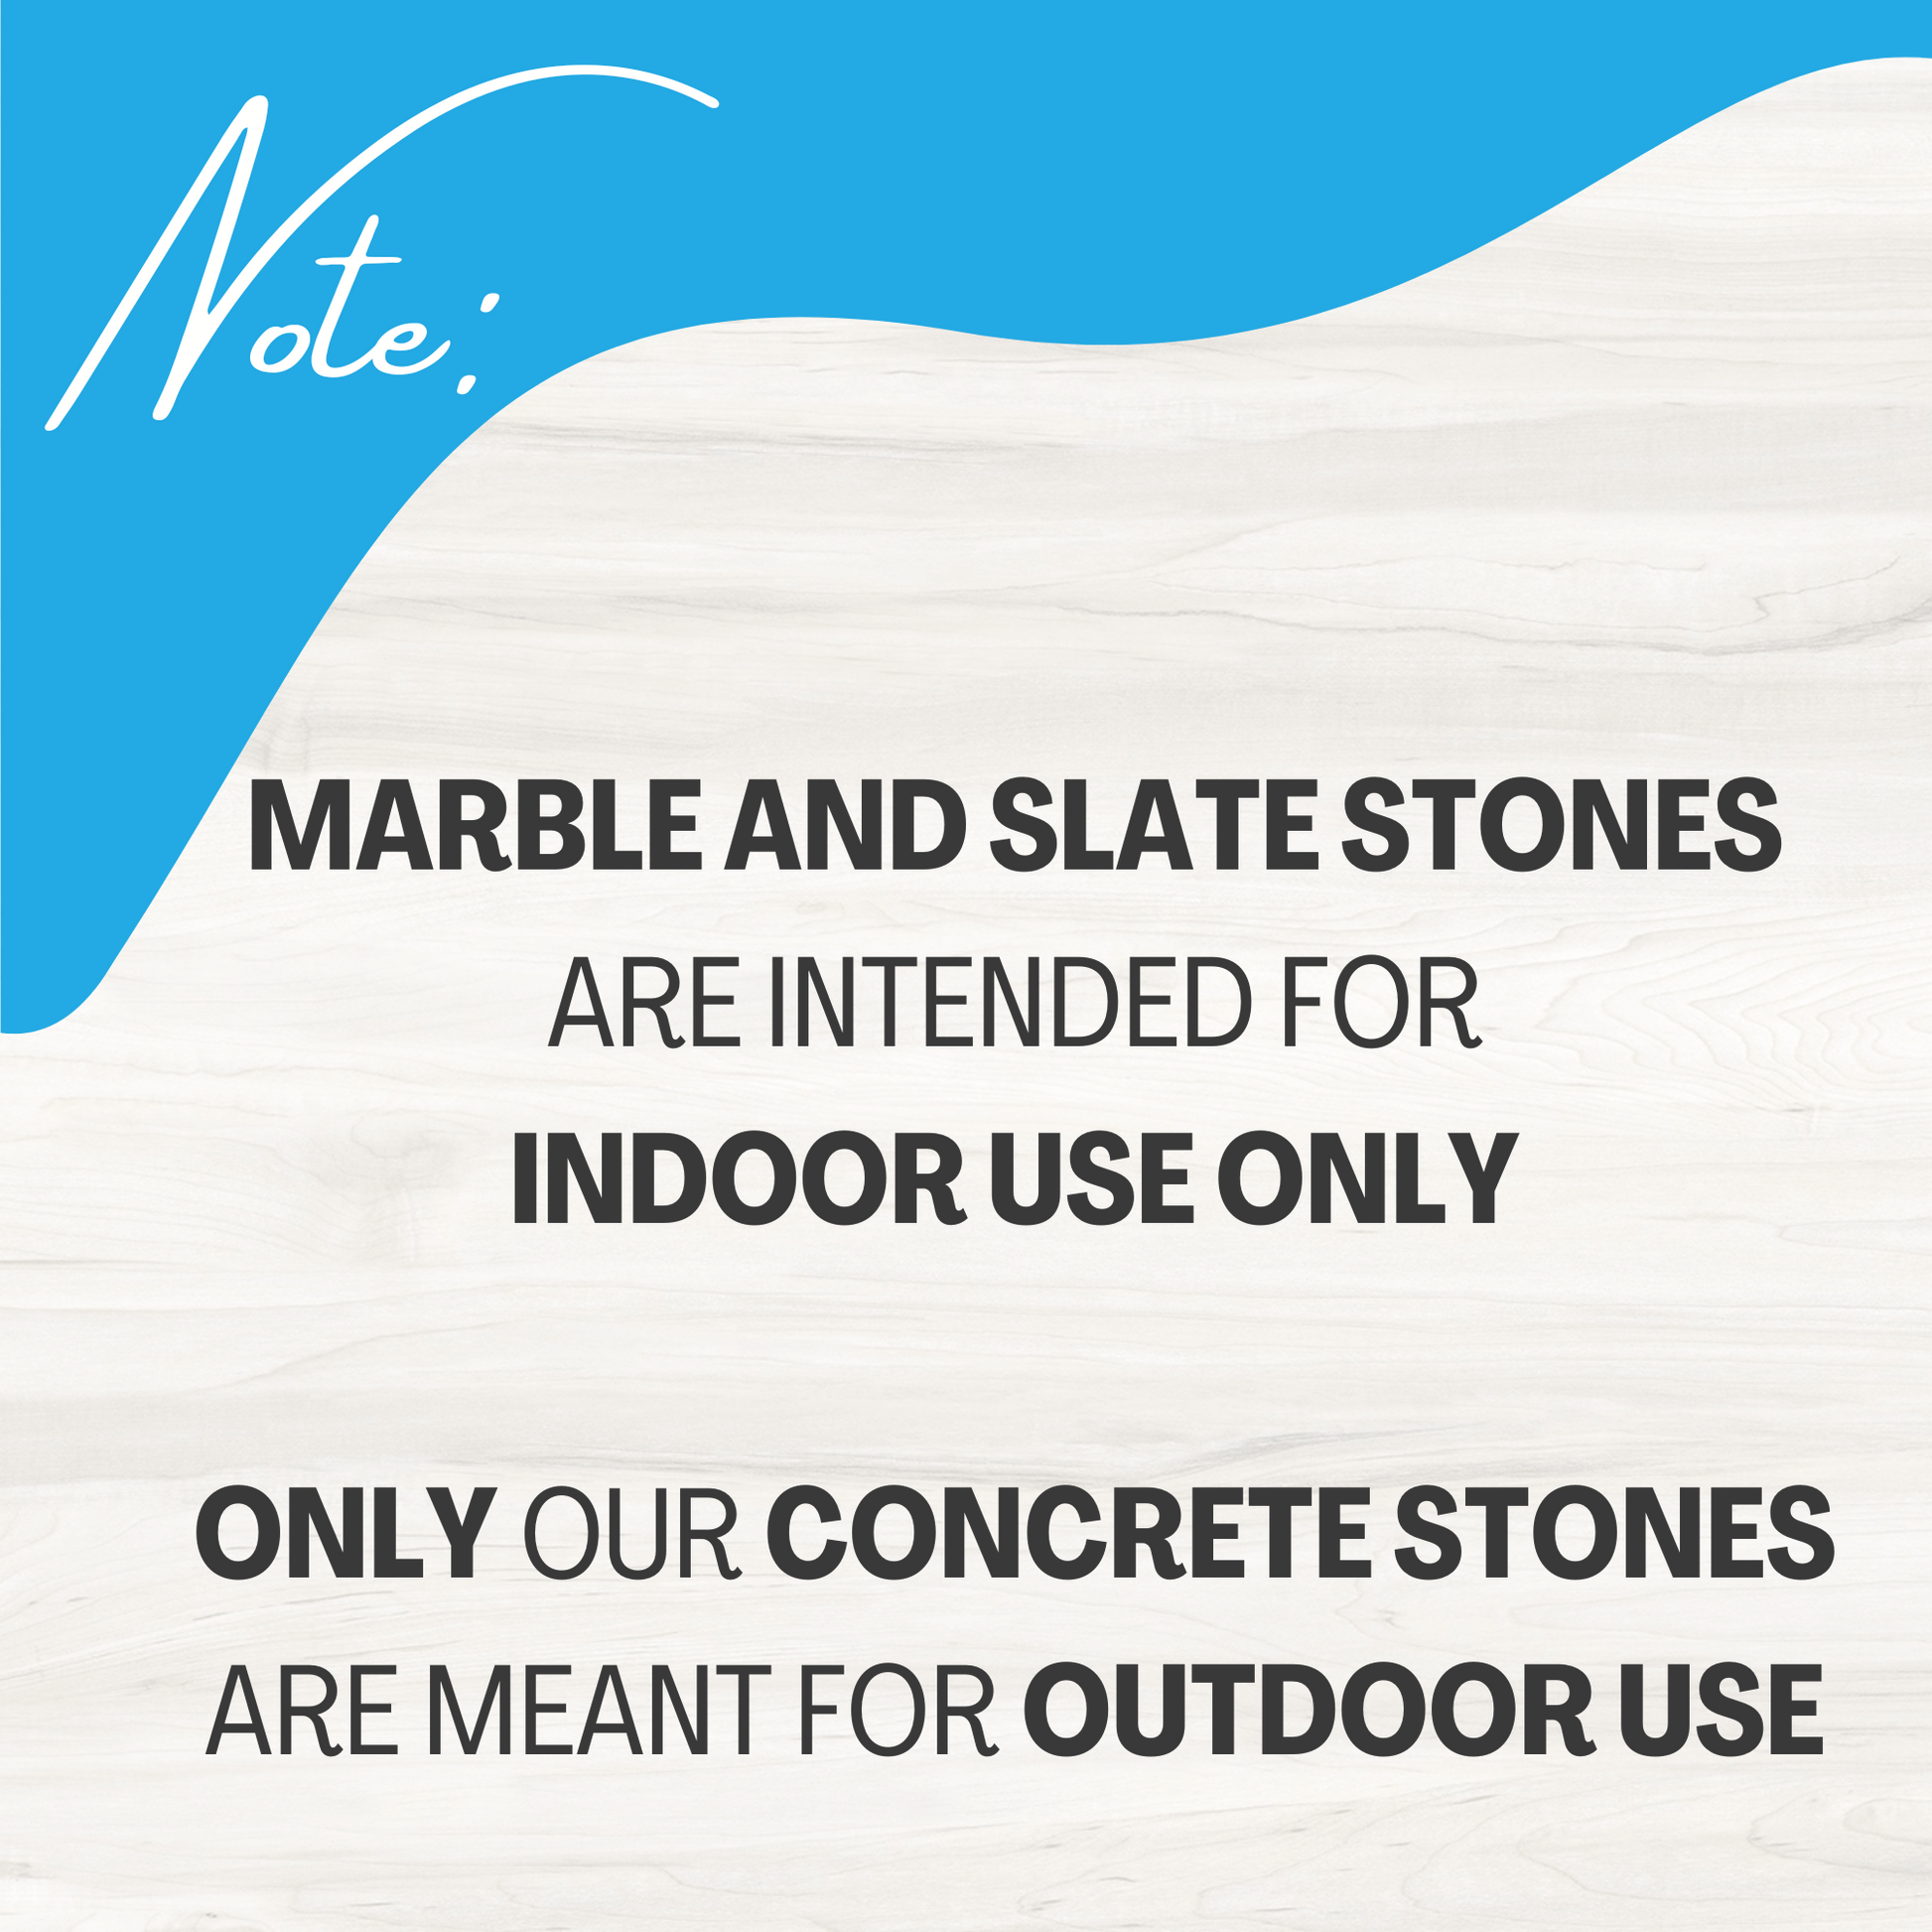 Notice to buyers: Marble and Slate stones are intended for indoor use only. Only our concrete stones are meant for outdoor use.